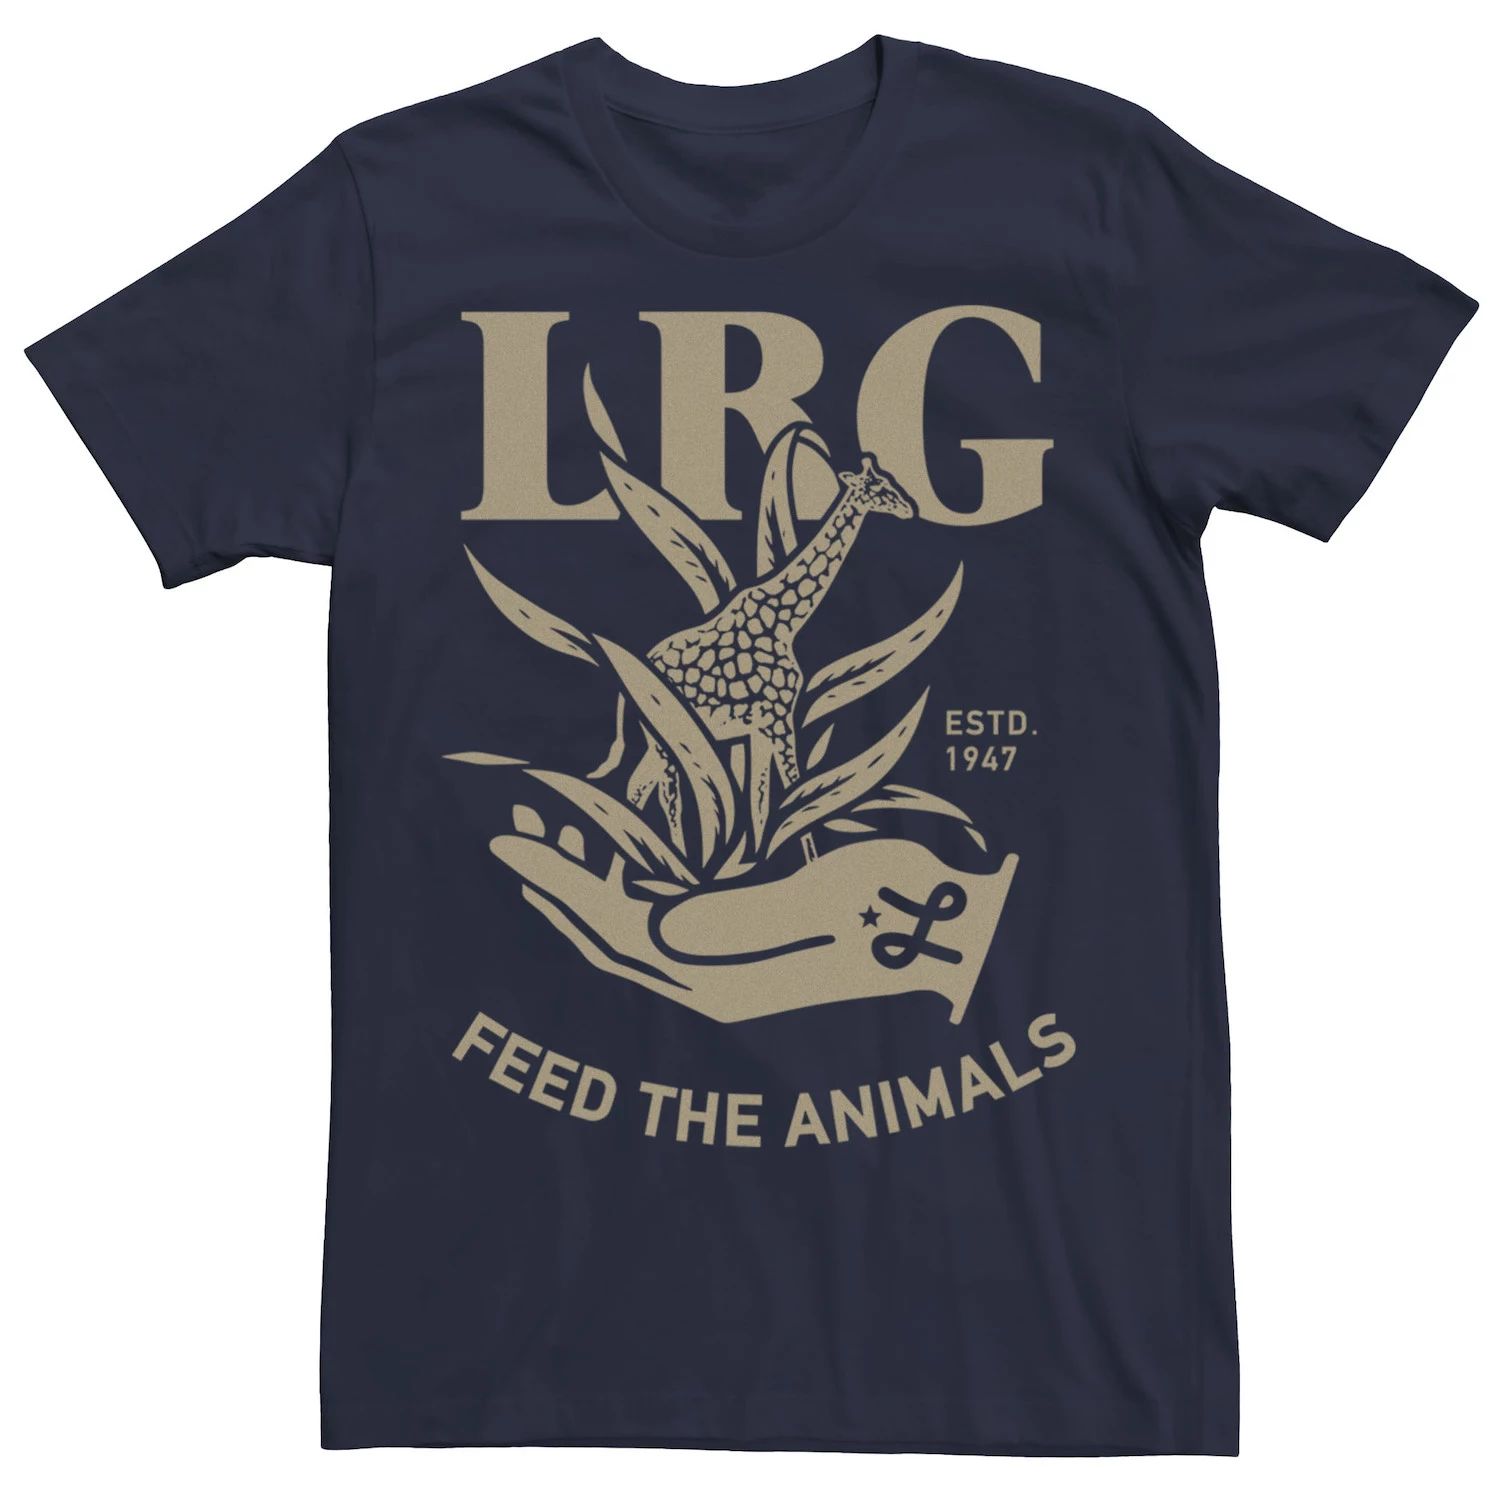 Мужская футболка LRG Feed The Animals Licensed Character don t feed the animals